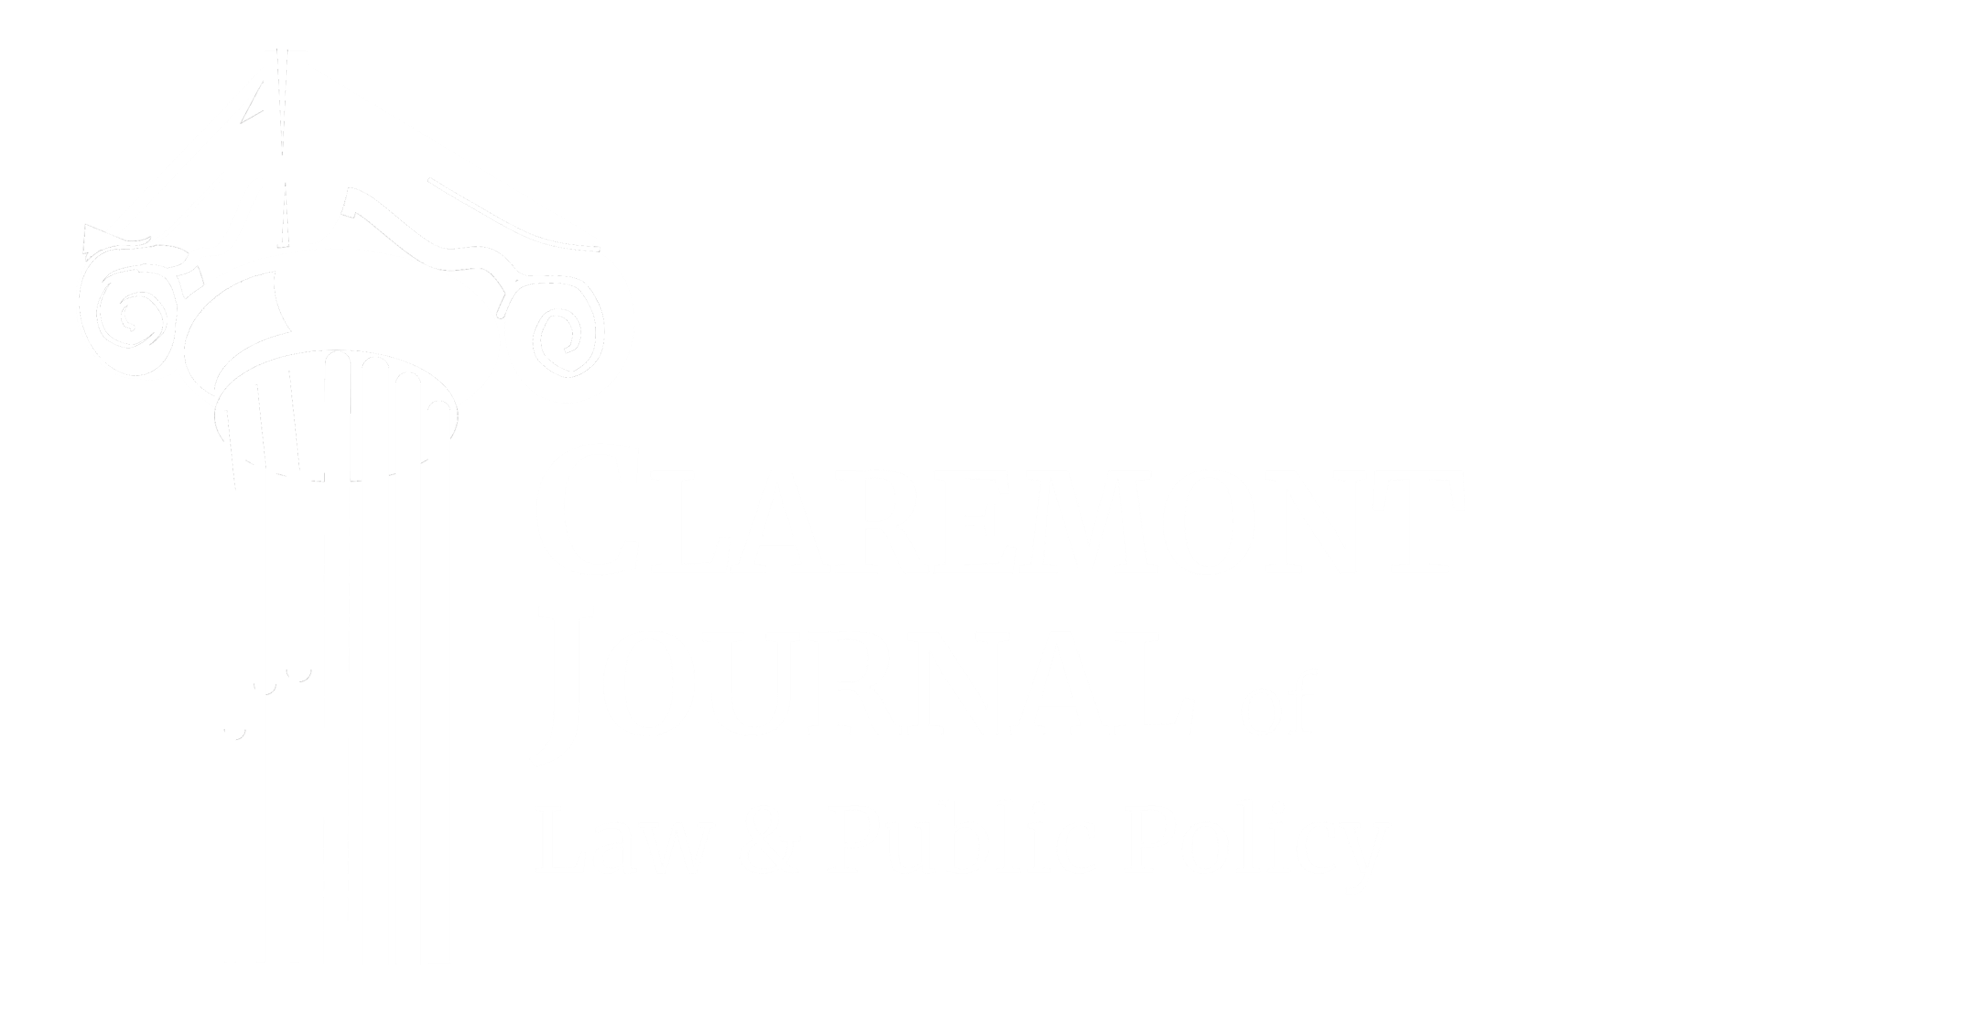 Claremont Journal of Law and Public Policy